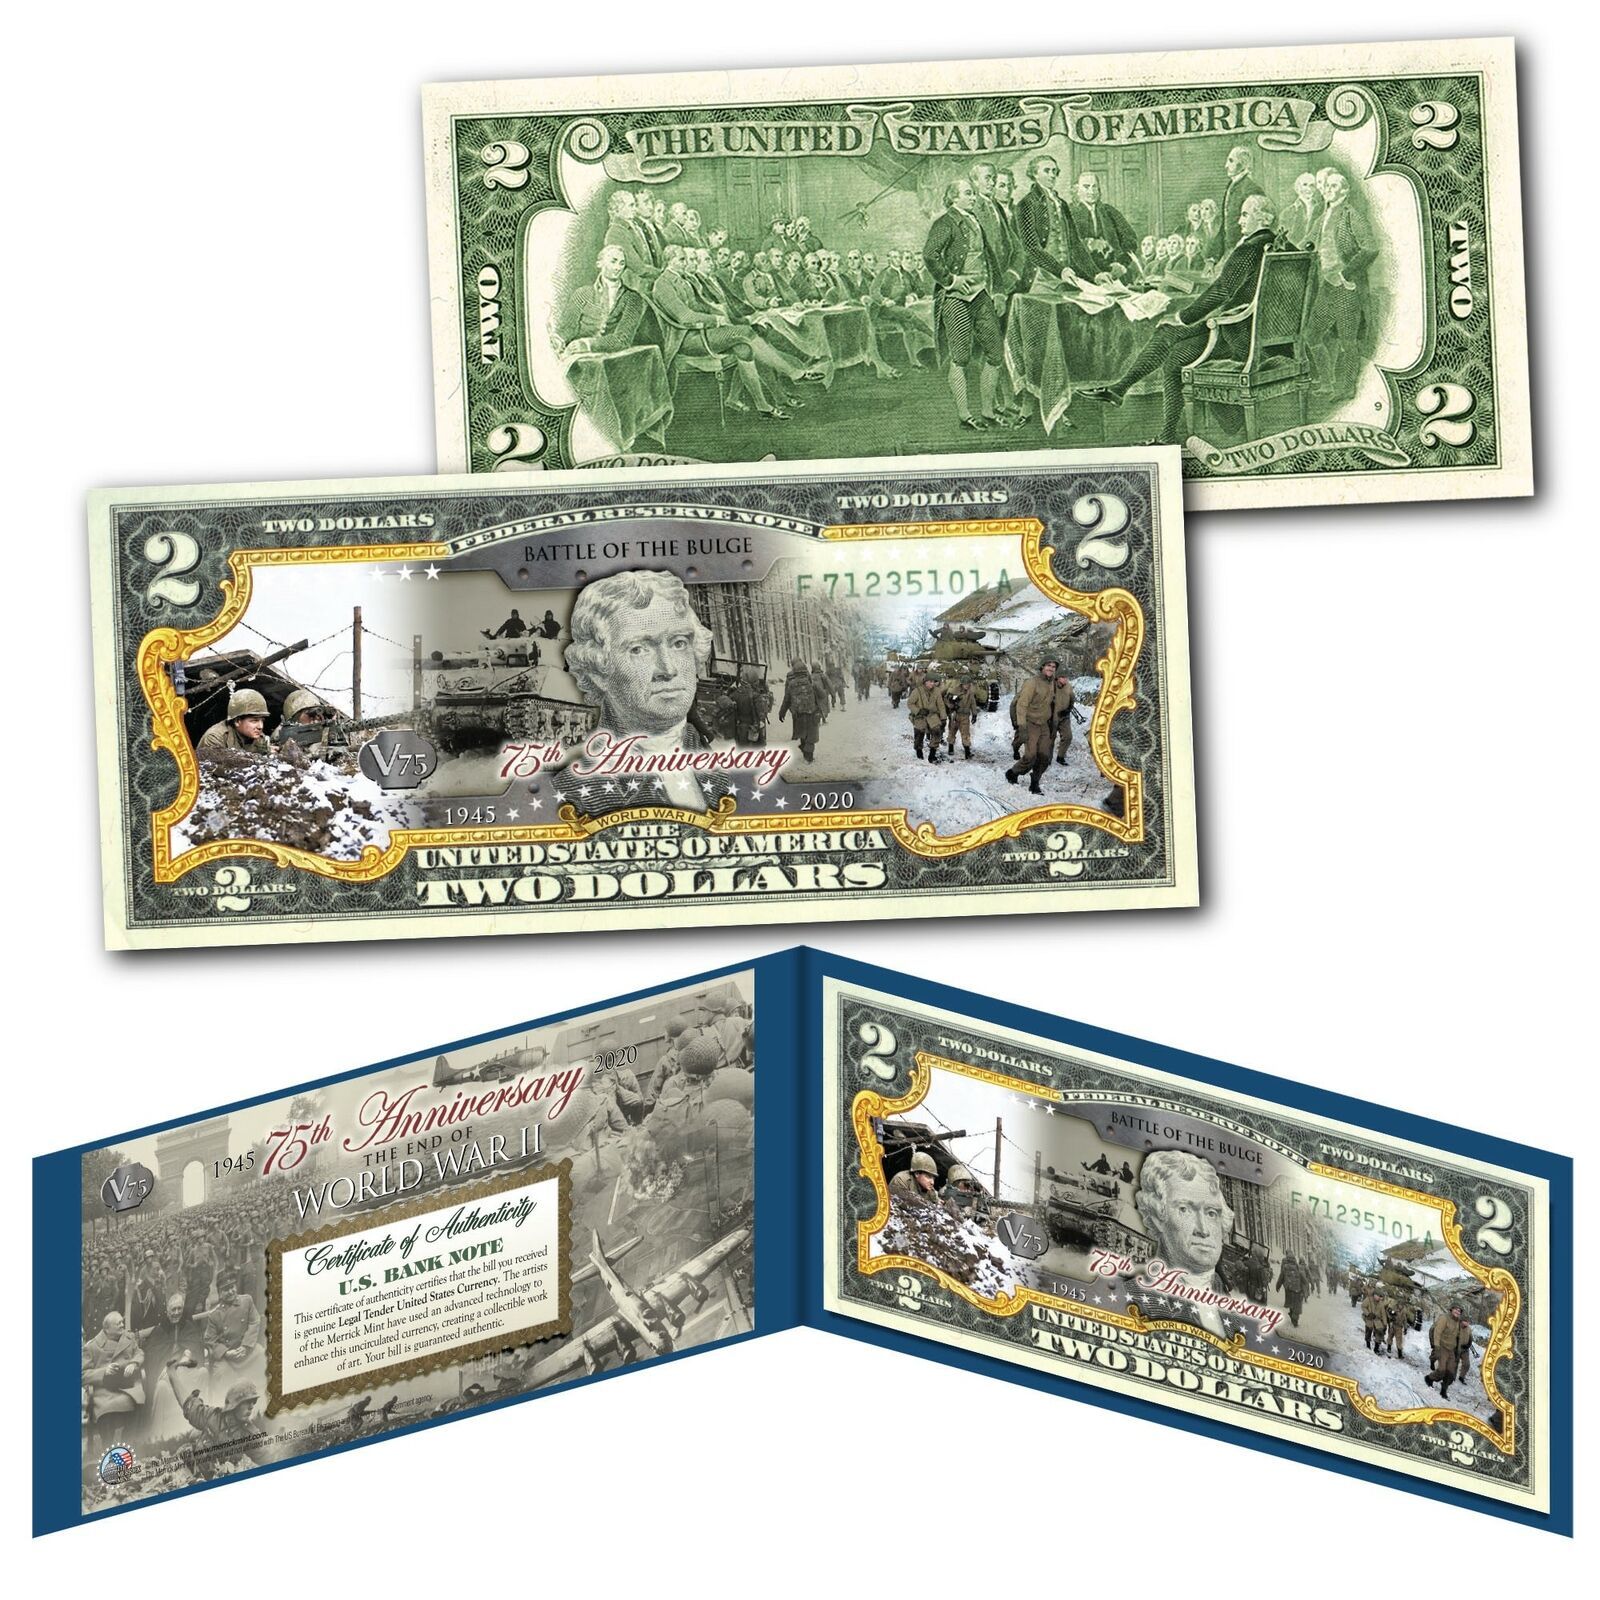 Primary image for BATTLE OF THE BULGE - End of WWII 75th Anniversary V75 - Authentic $2 U.S. Bill